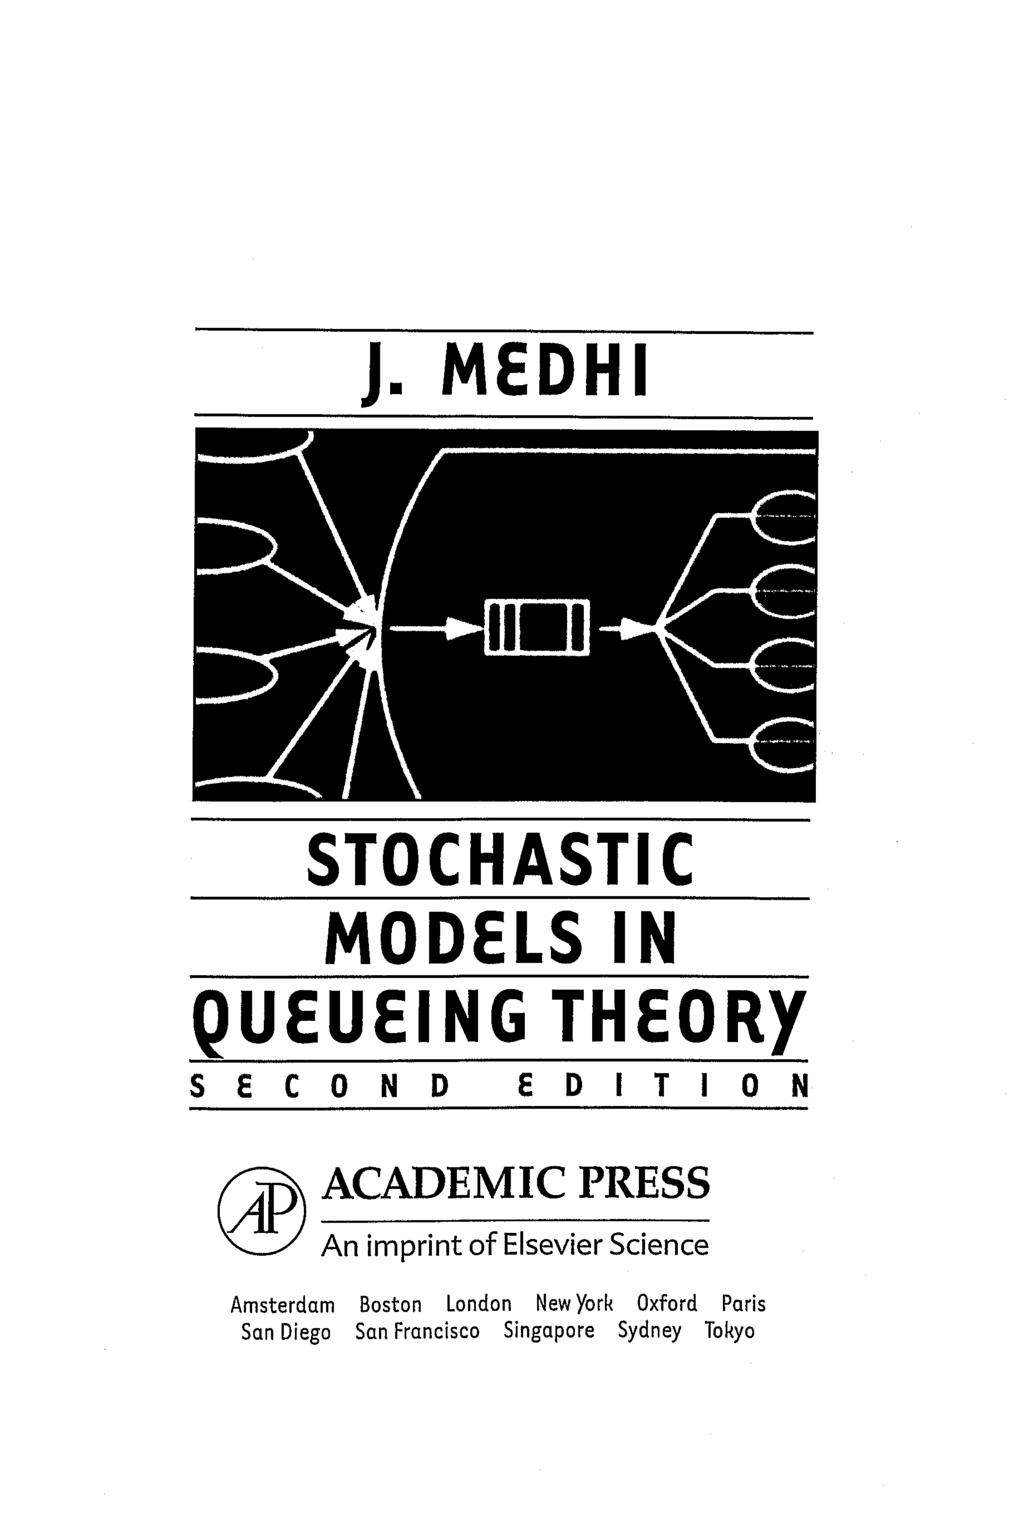 J. MEDHI STOCHASTIC MODELS IN QUEUEING THEORY SECOND EDITION ACADEMIC PRESS An imprint of Elsevier